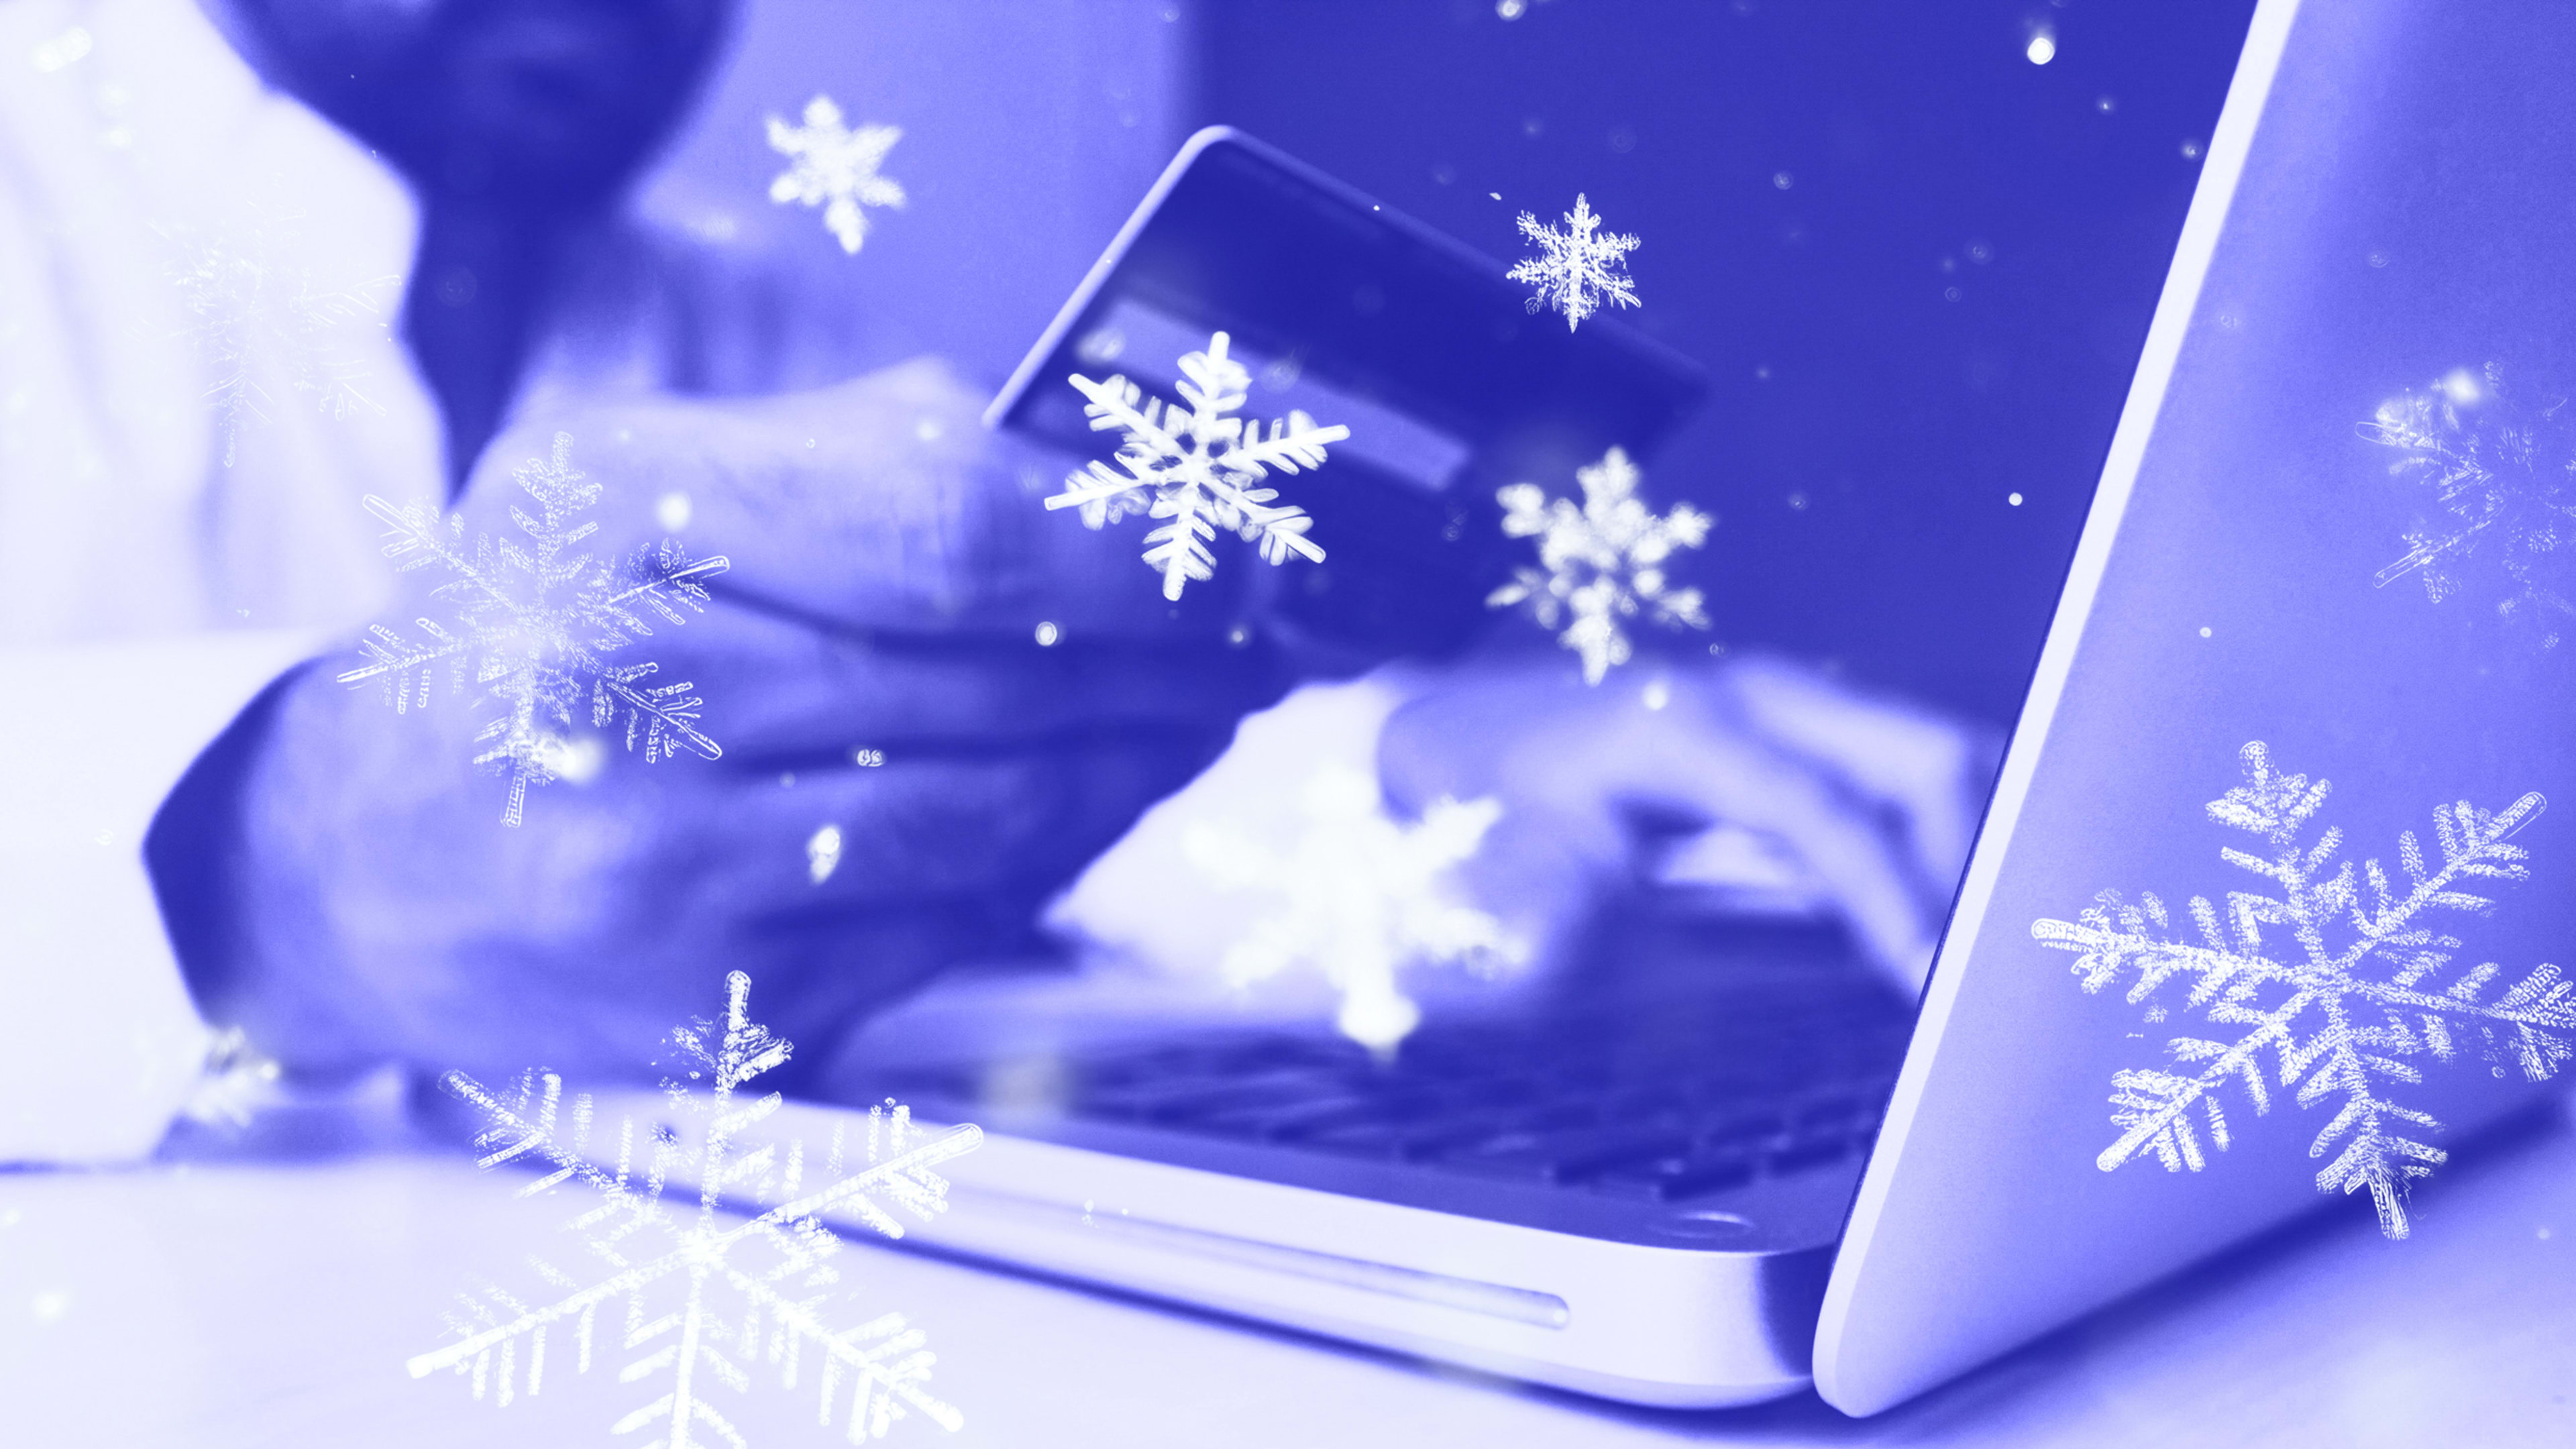 Save big on last-minute holiday shopping with these  4 free apps and sites